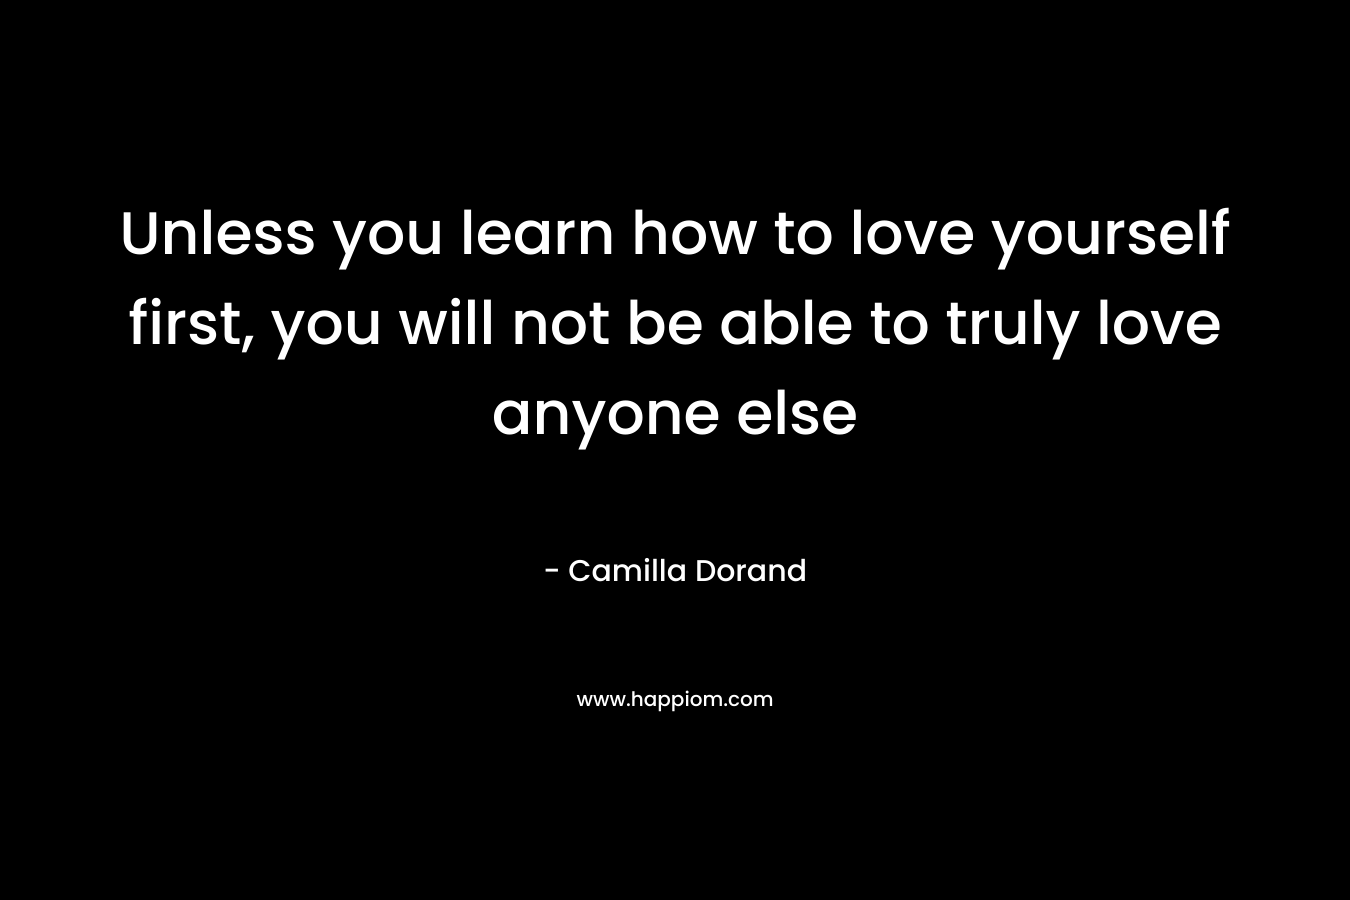 Unless you learn how to love yourself first, you will not be able to truly love anyone else